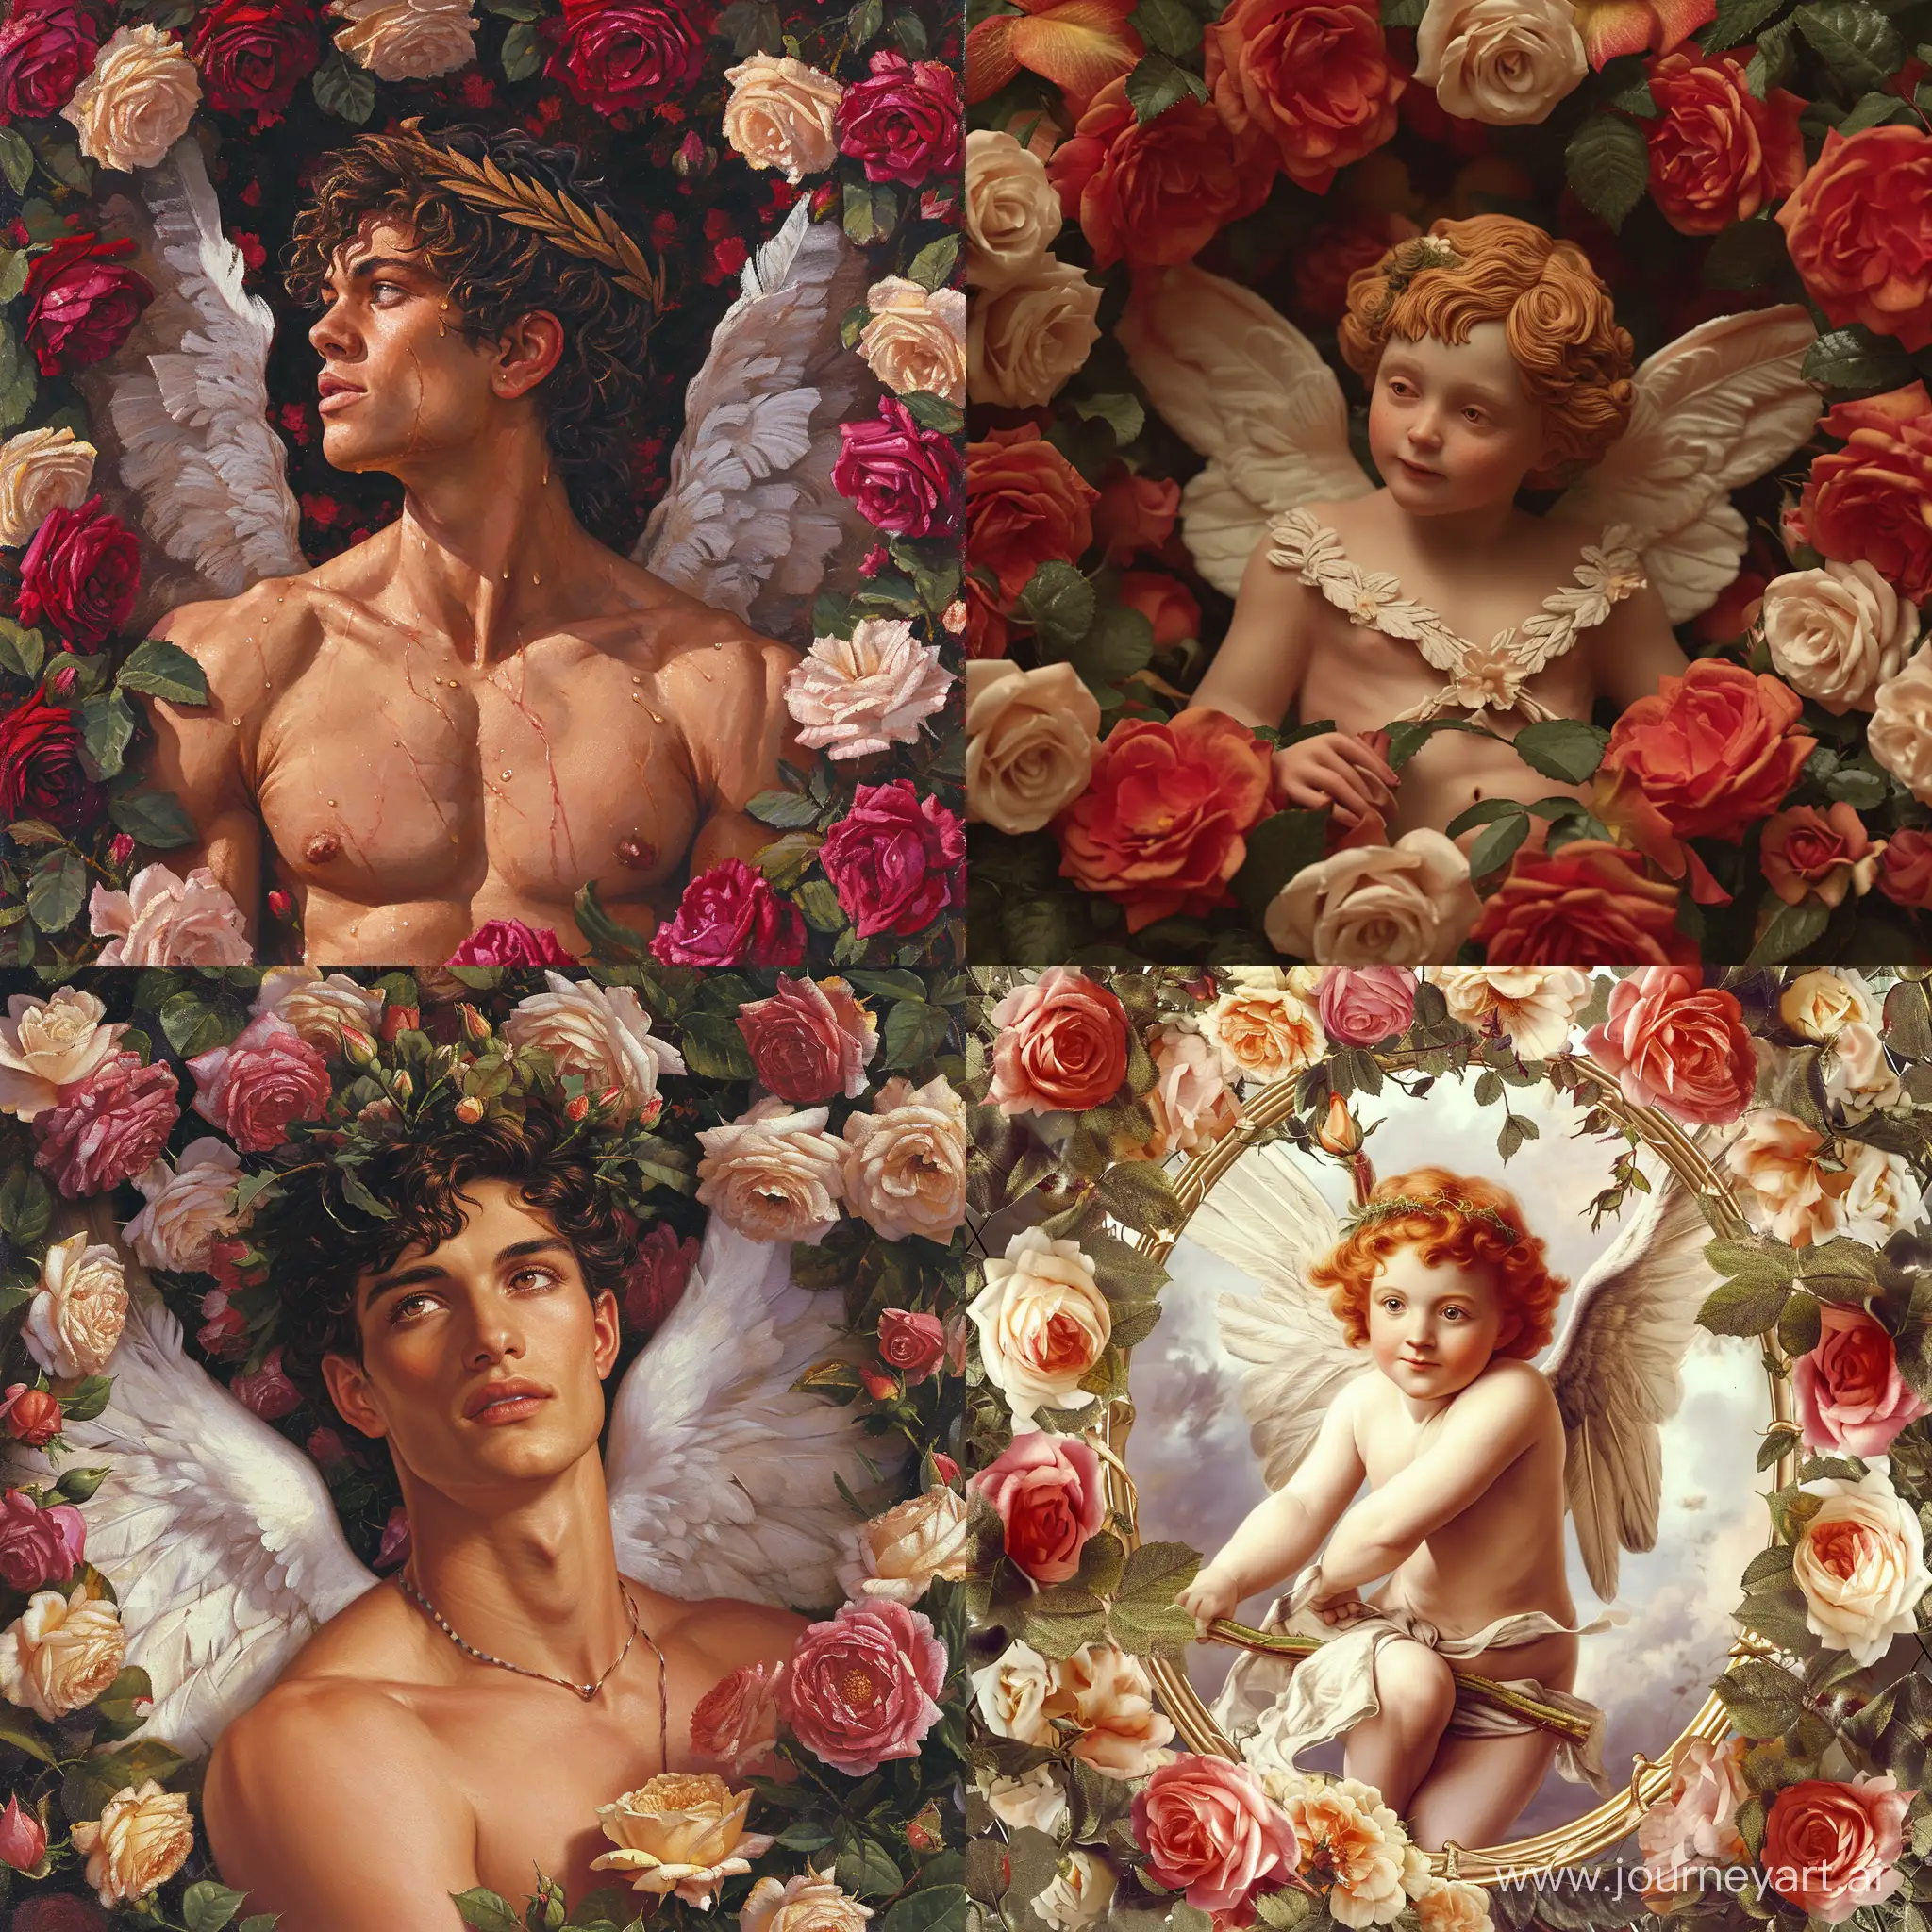 Charming-Cupid-Embraced-by-a-Sea-of-Romantic-Roses